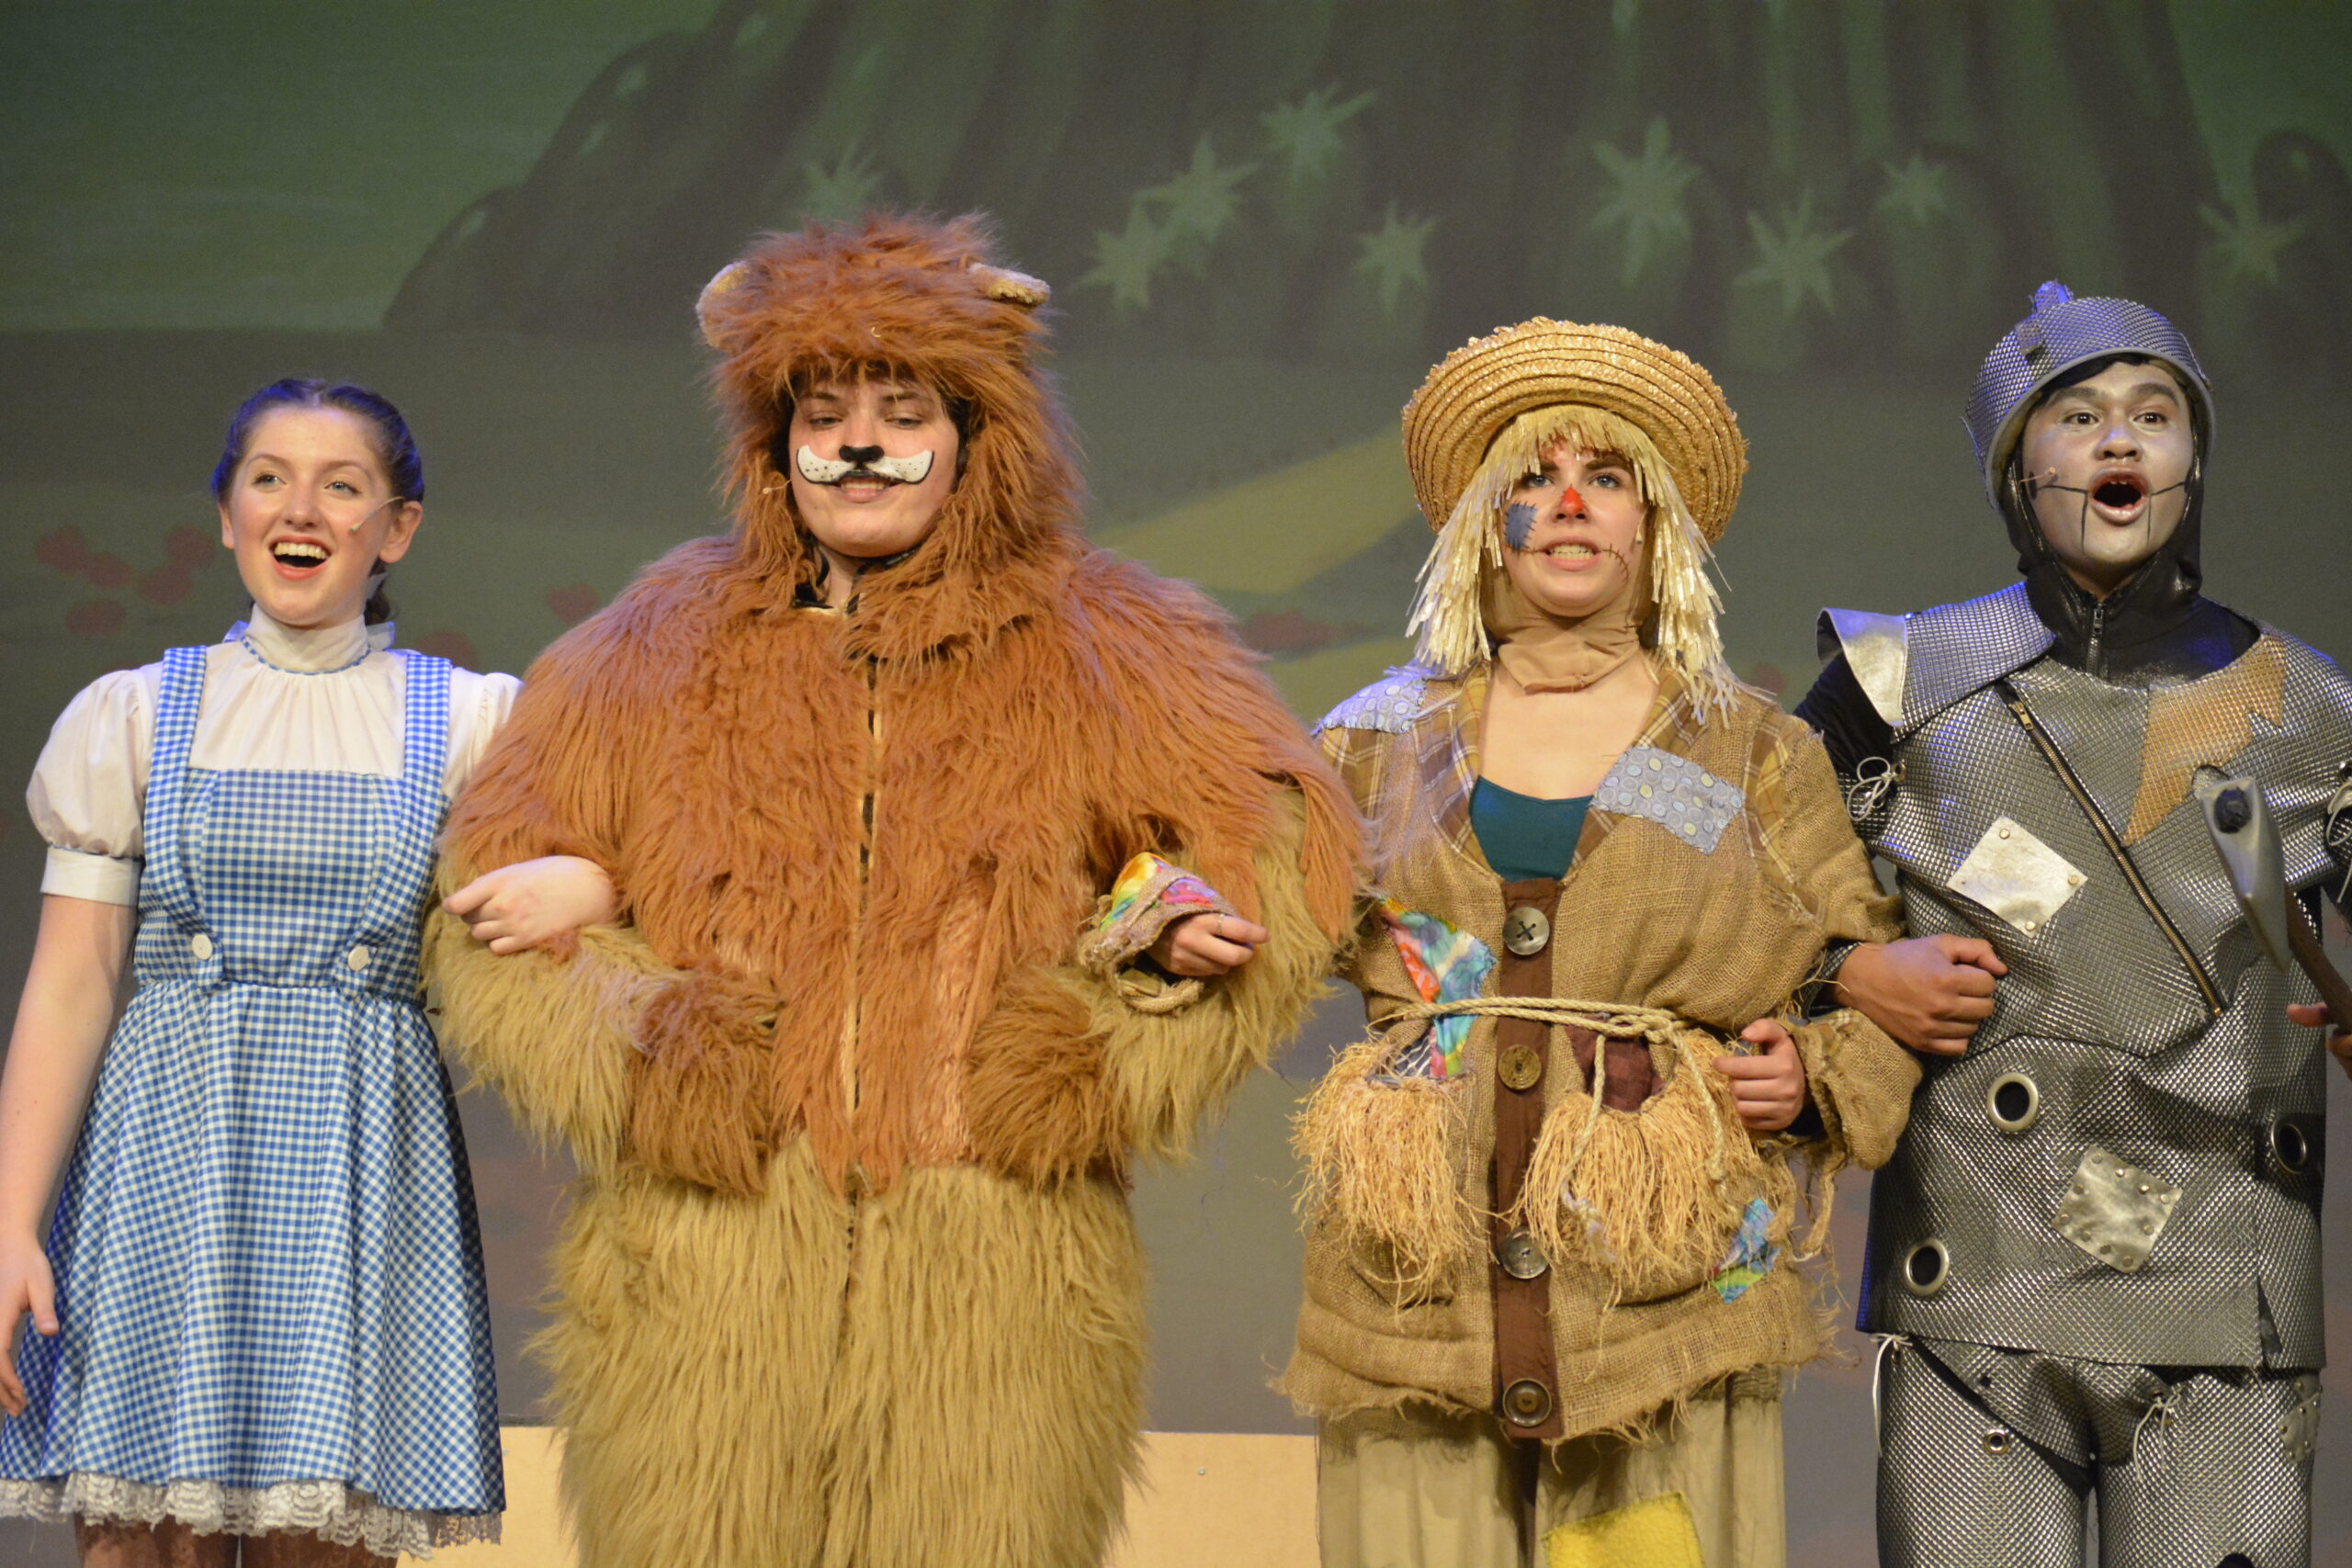 ArtSMART: cast of "The Wizard of Oz" performing on stage